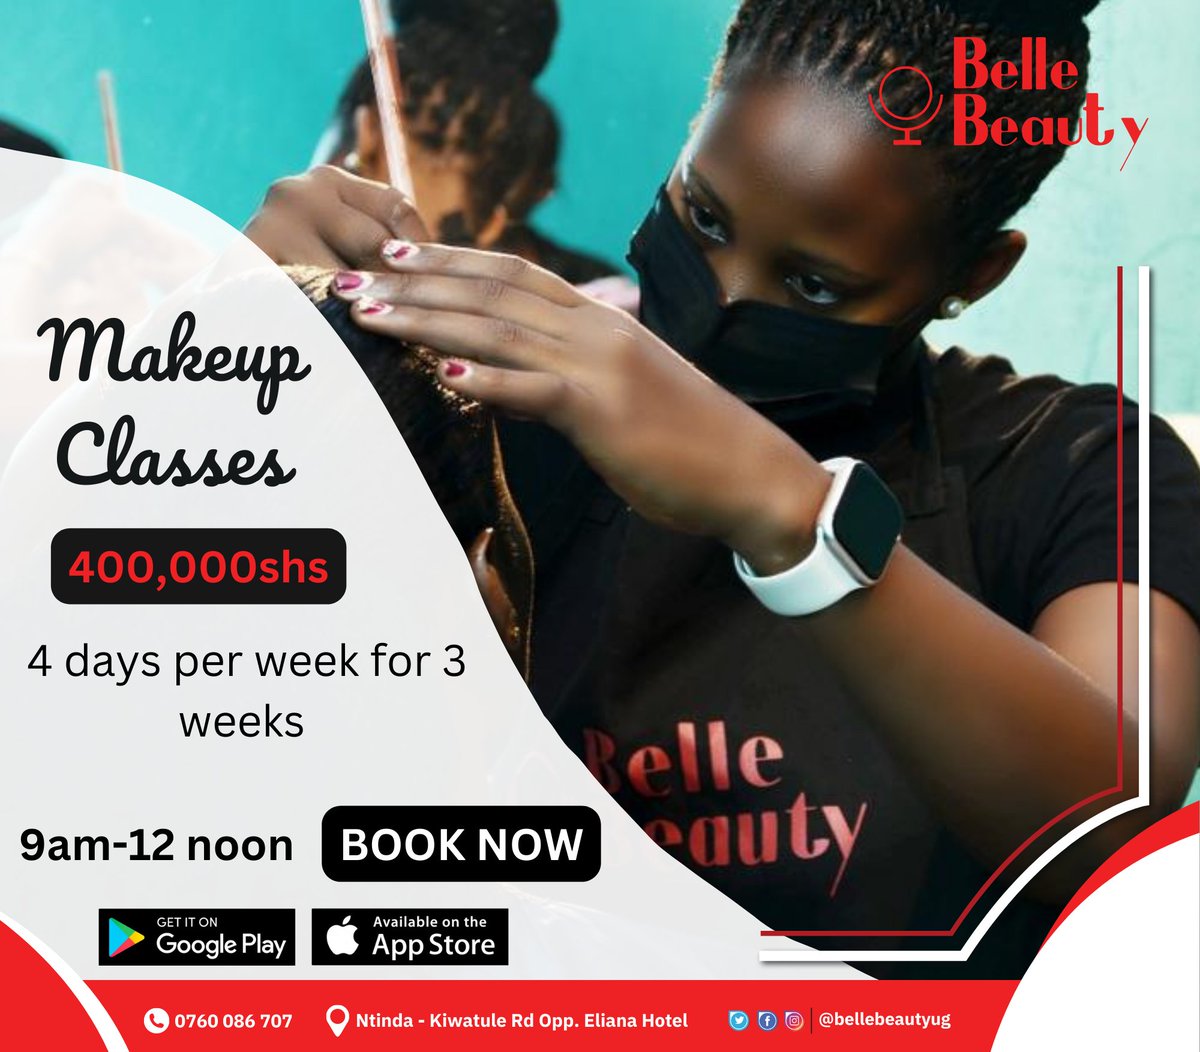 Transform your passion for makeup into a skillful art: Enroll in our makeup classes and shine.

Call 0760086707 to book.

#makeupclasses #makeupartists #bellebeautyuganda